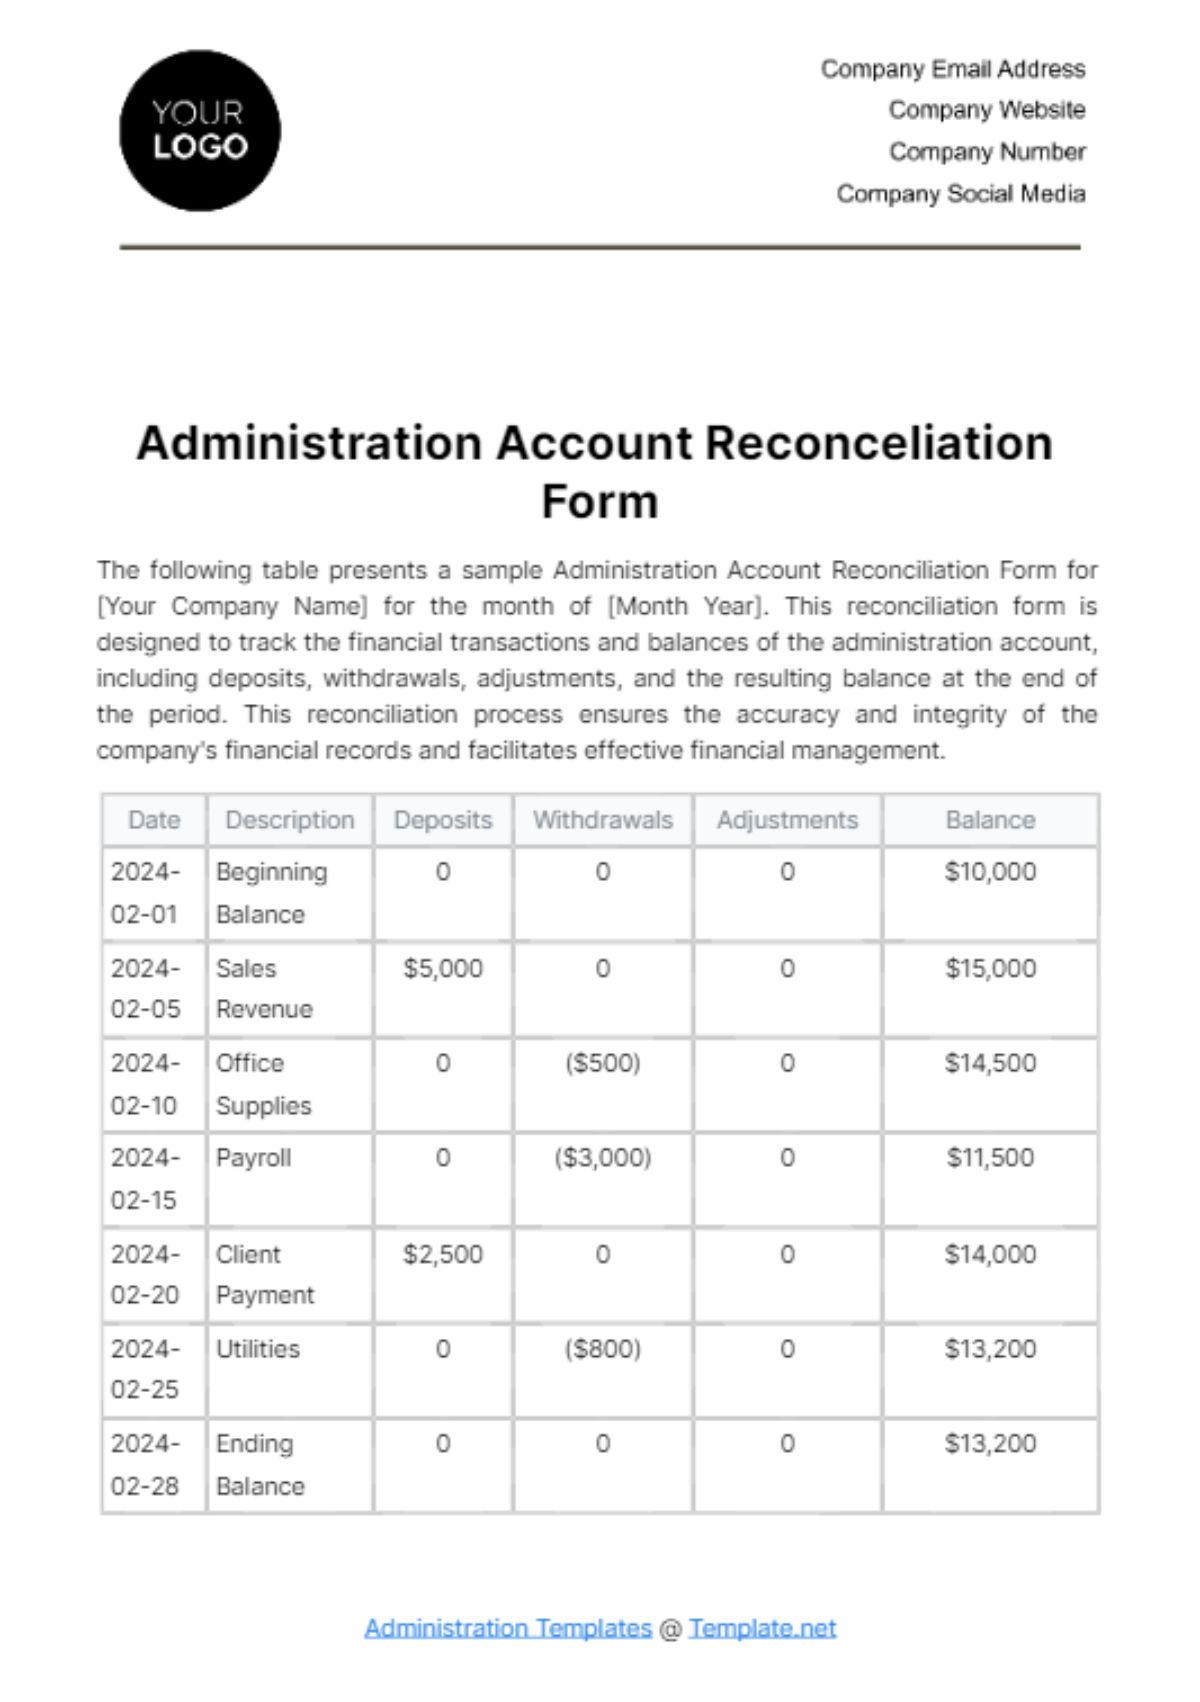 Free Administration Account Reconciliation Form Template